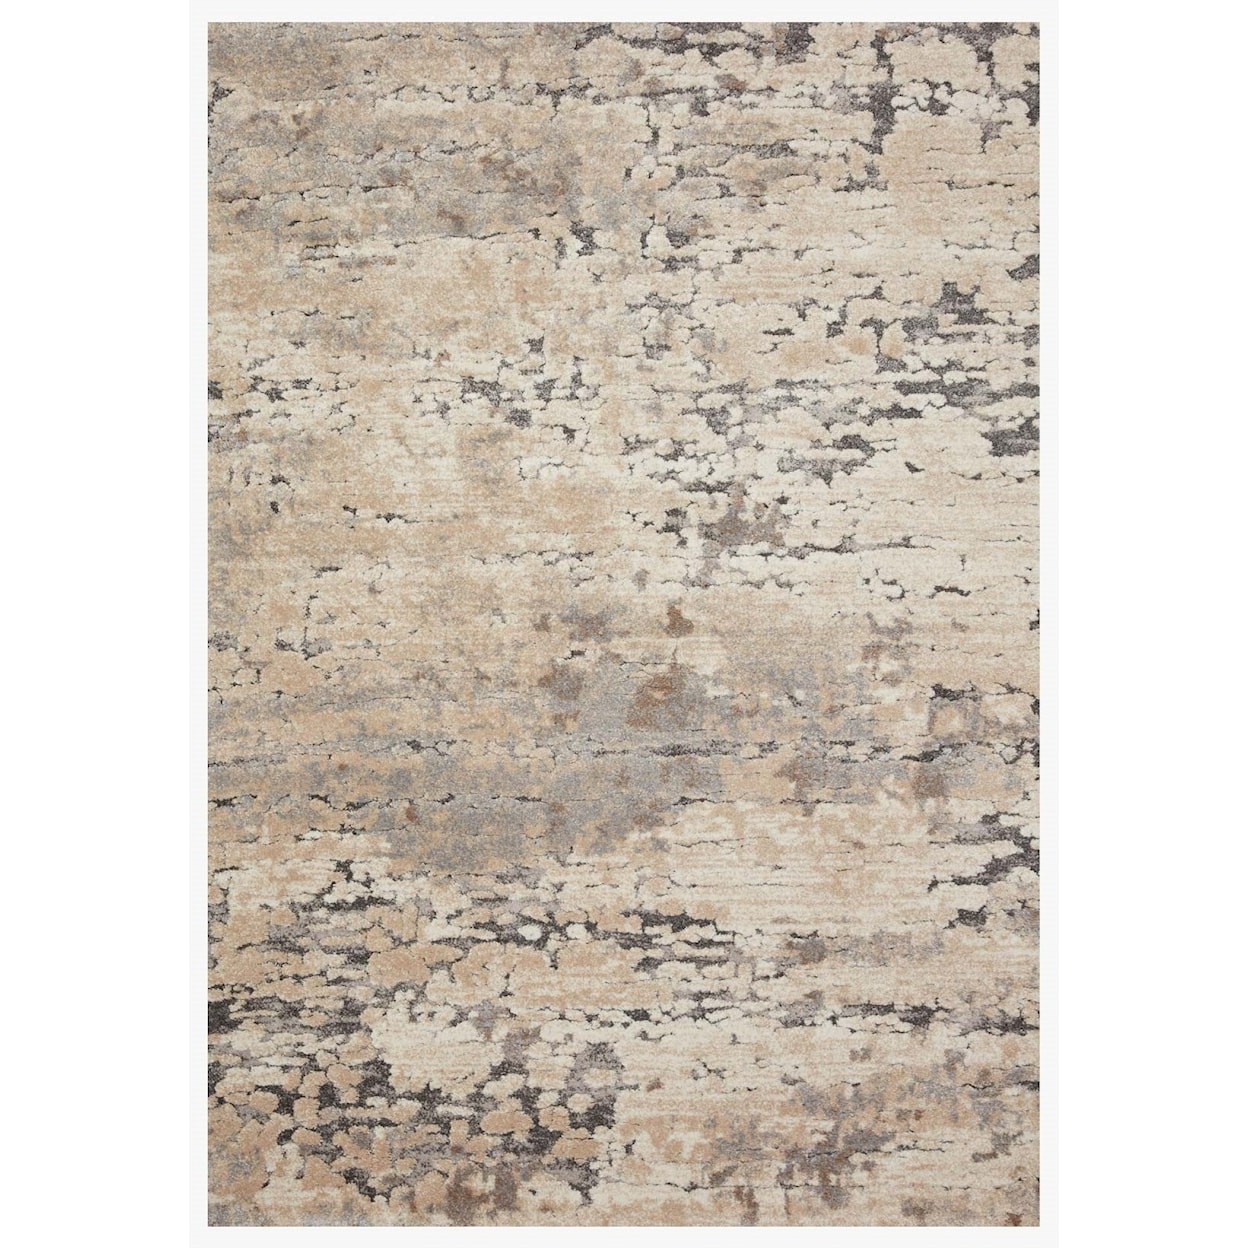 Reeds Rugs Theory 9'6" x 13' Taupe / Grey Rug